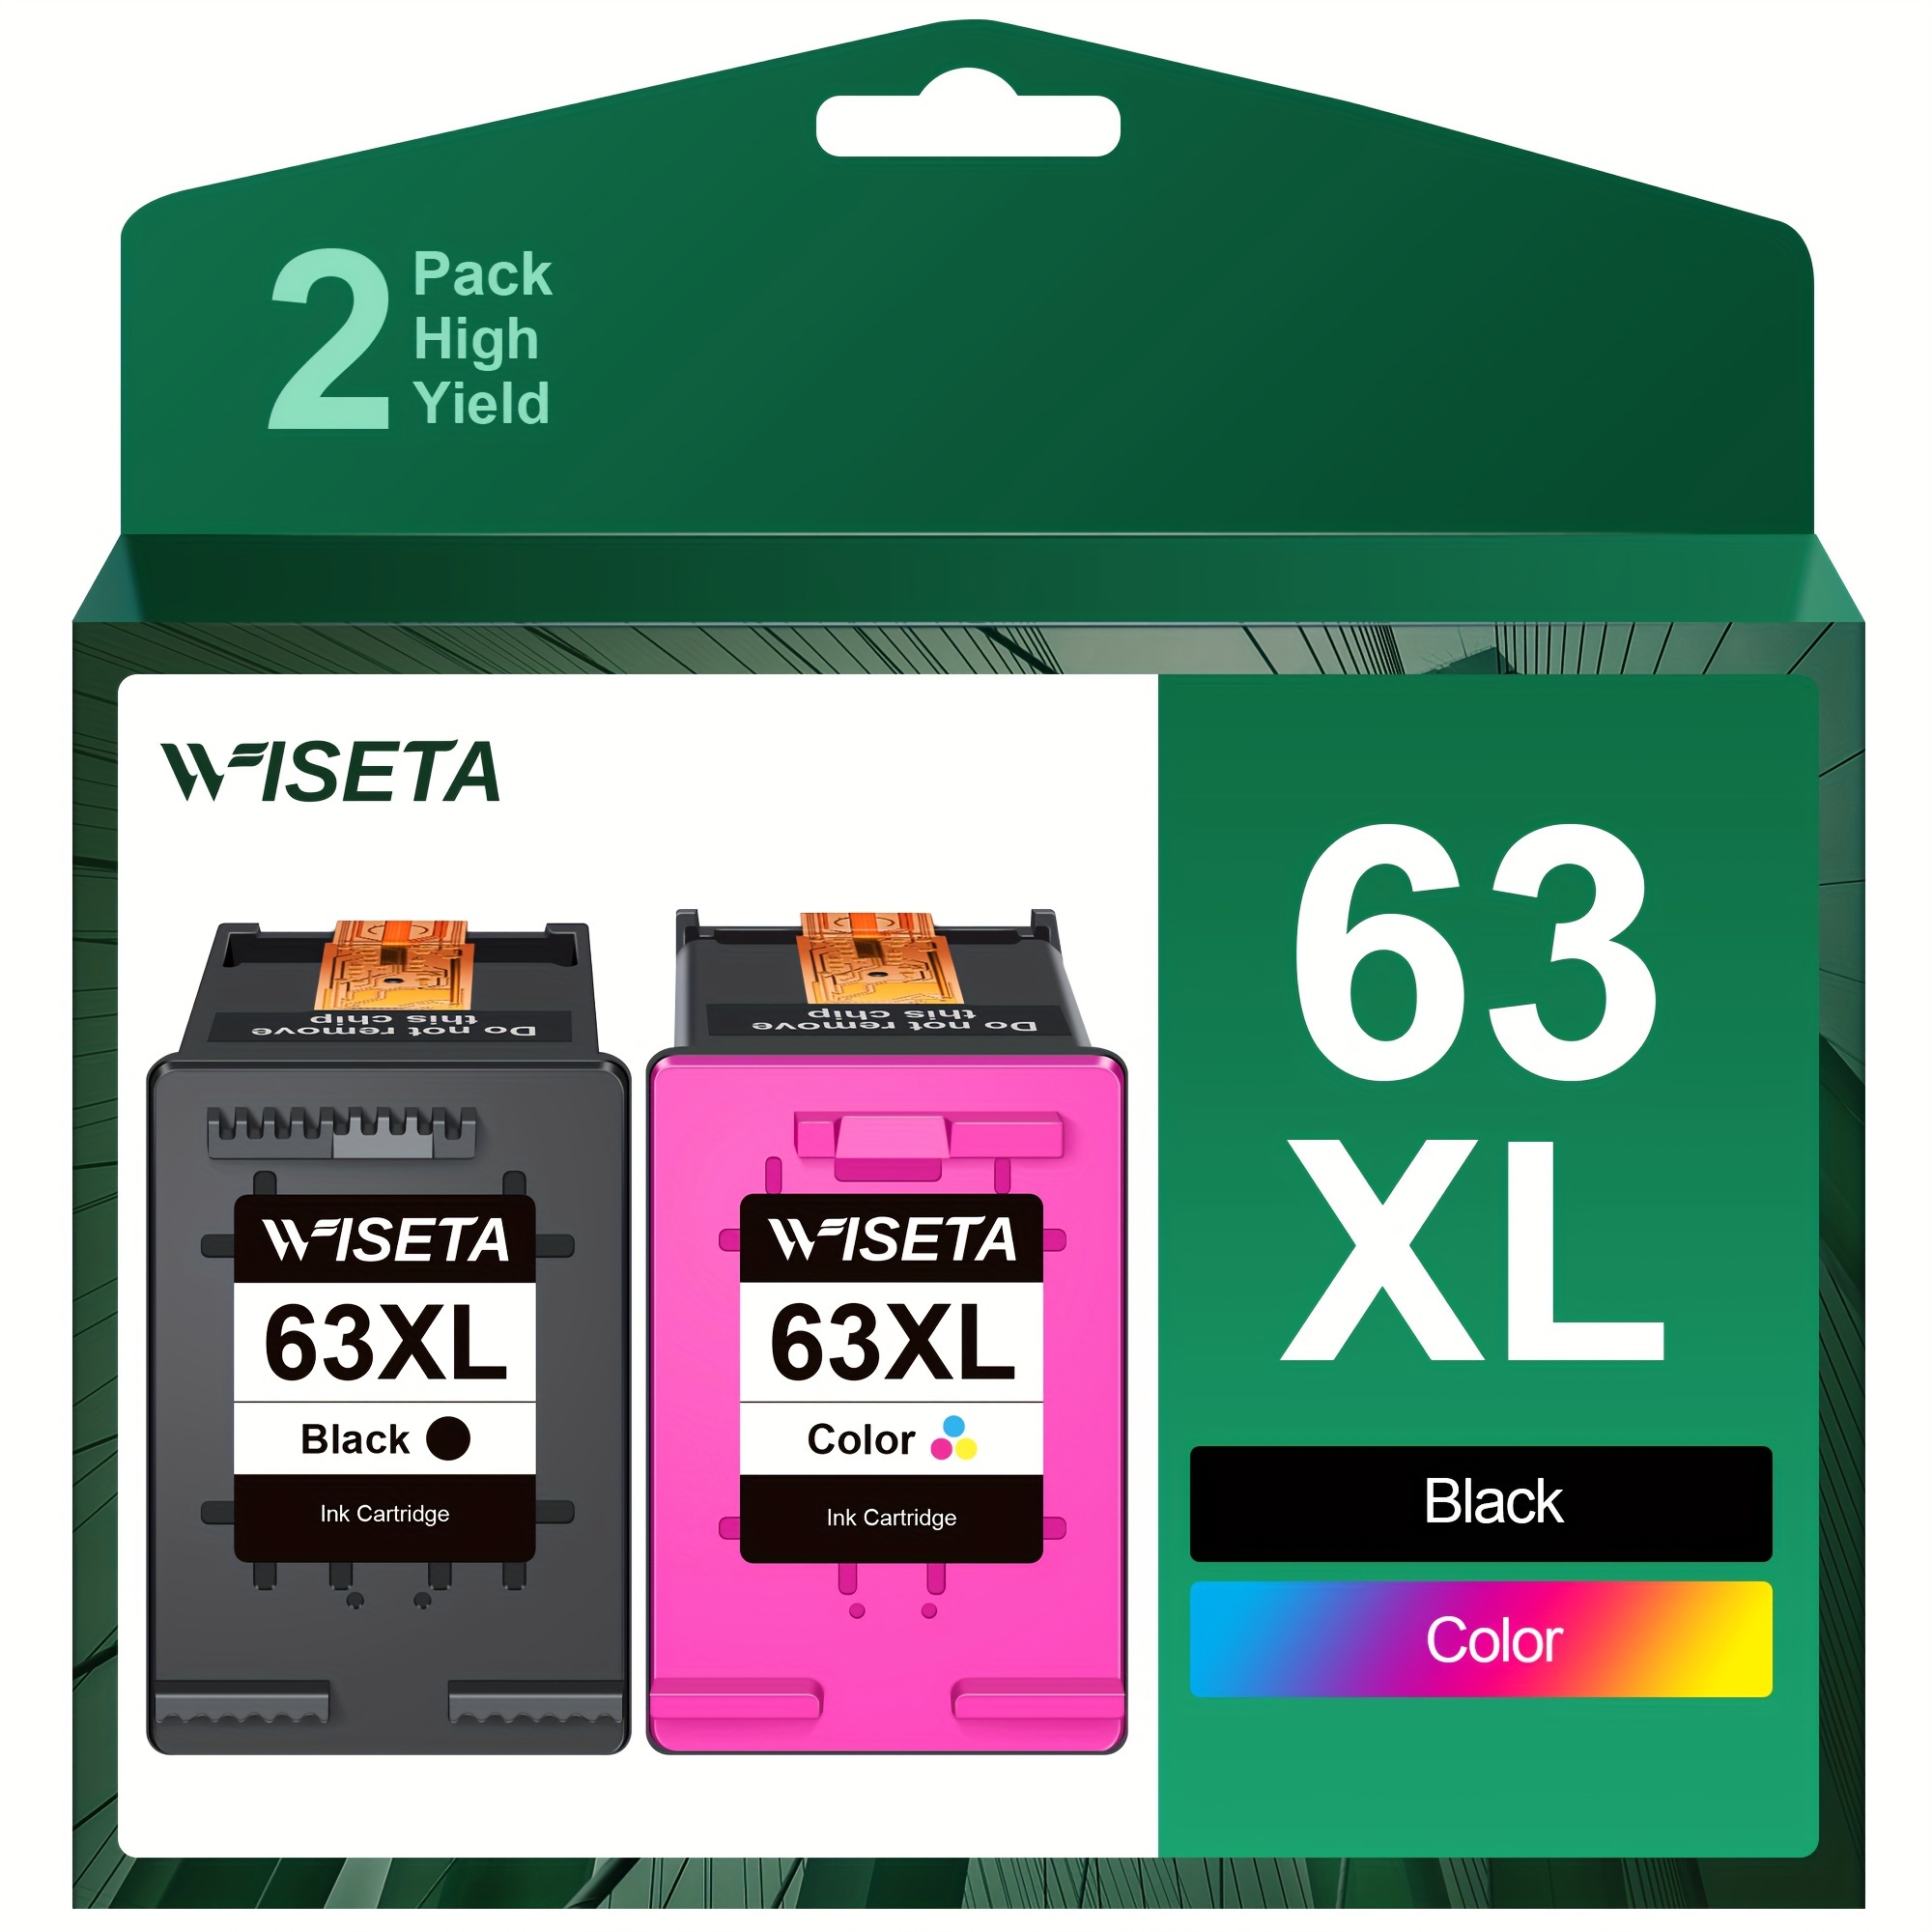 

Wiseta Remanufactured Ink Cartridge Replacement For 63xl 63 Xl To Use With Officejet 3830 5255 4650 3833 Envy 4520 Deskjet 1112 3637 3630 3634 Printer (1 Black, 1 Tri-color)